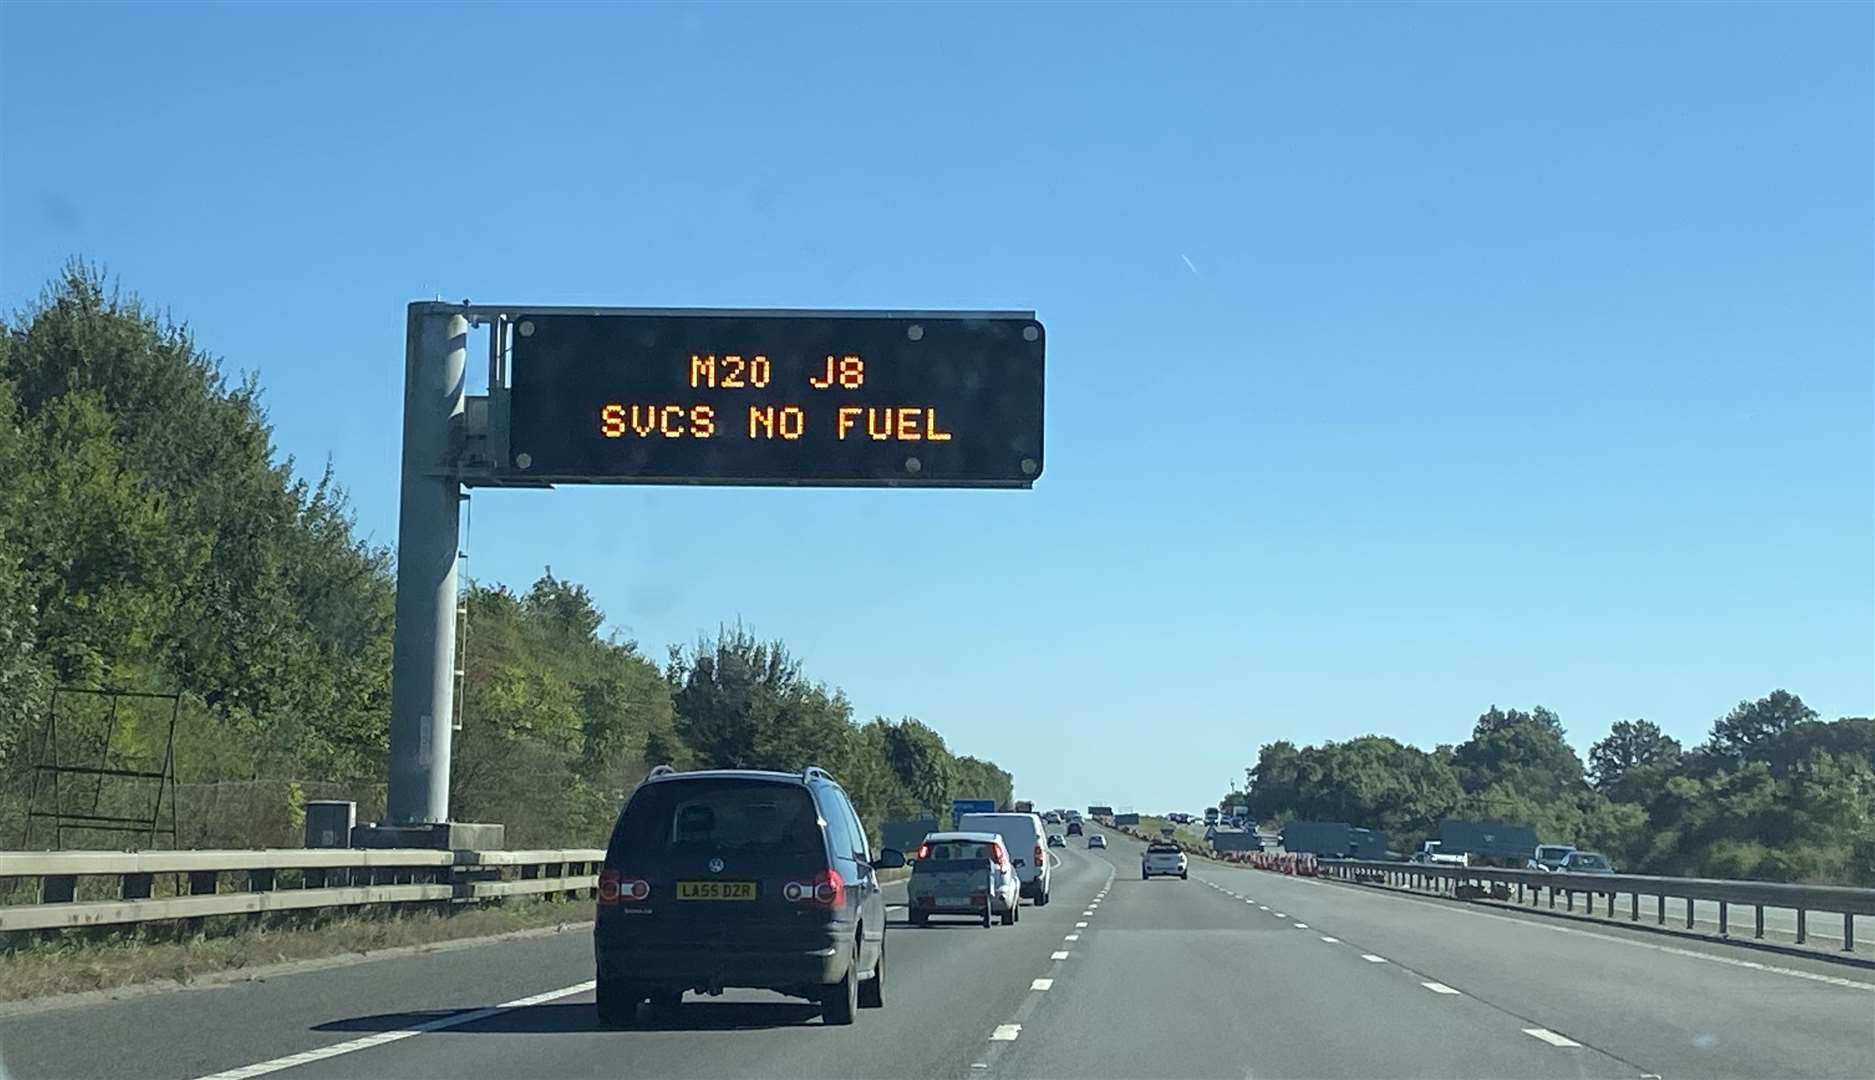 The M20 Junction 8 services have run out of fuel